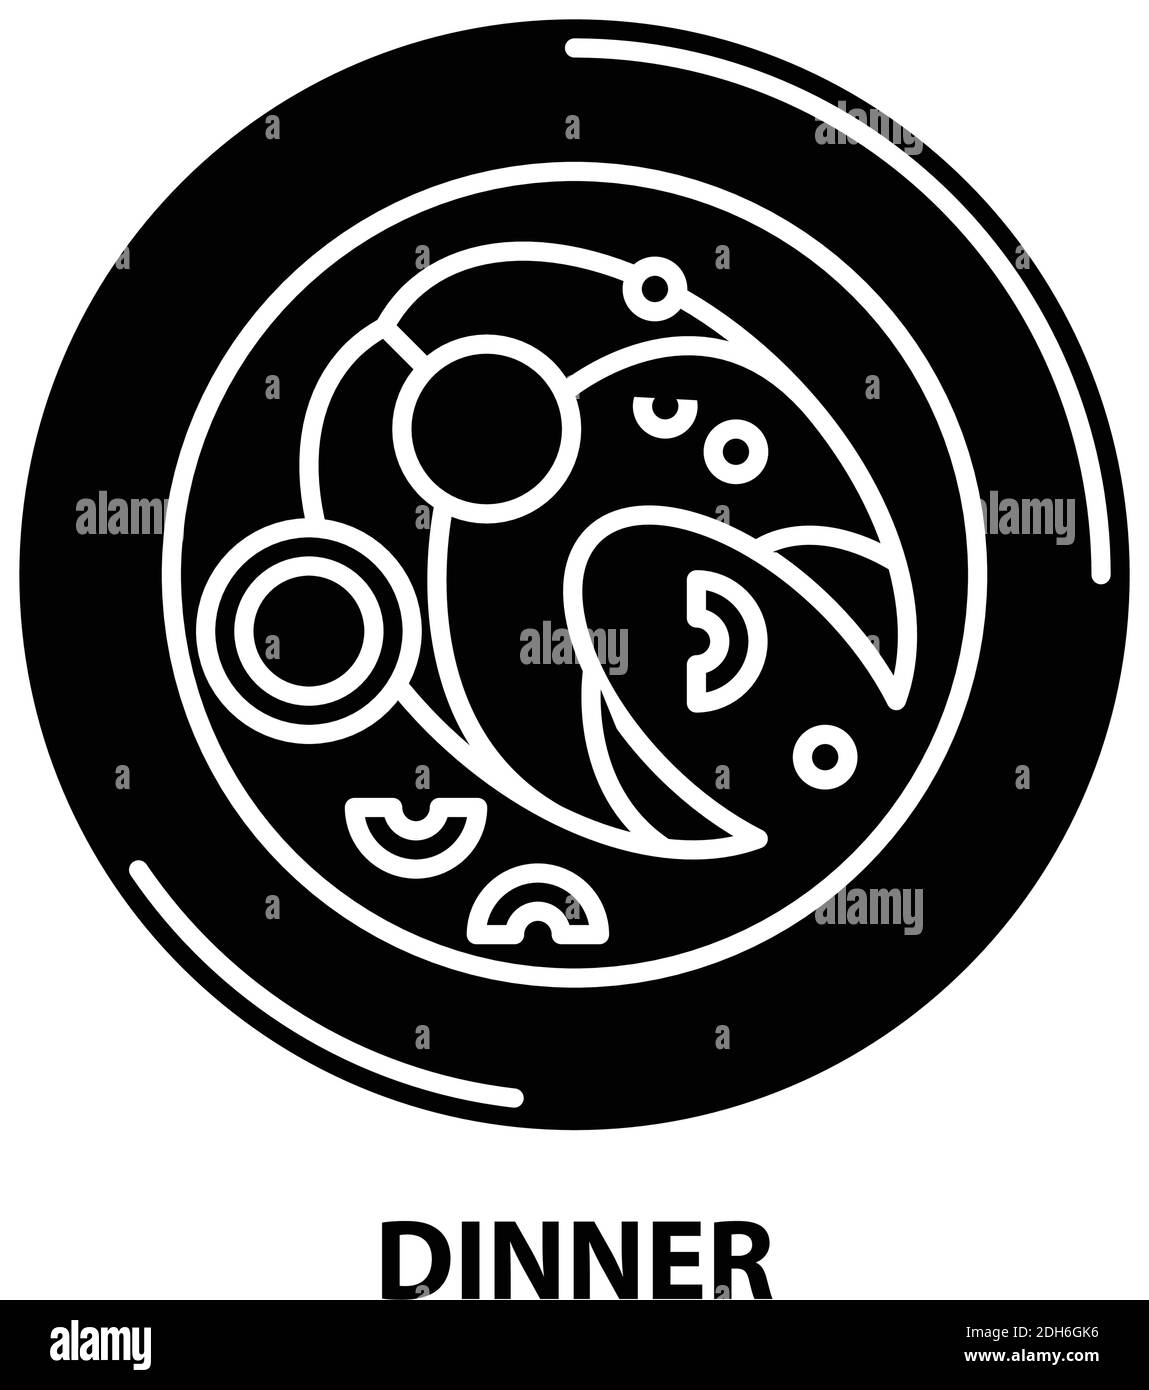 dinner icon, black vector sign with editable strokes, concept illustration Stock Vector